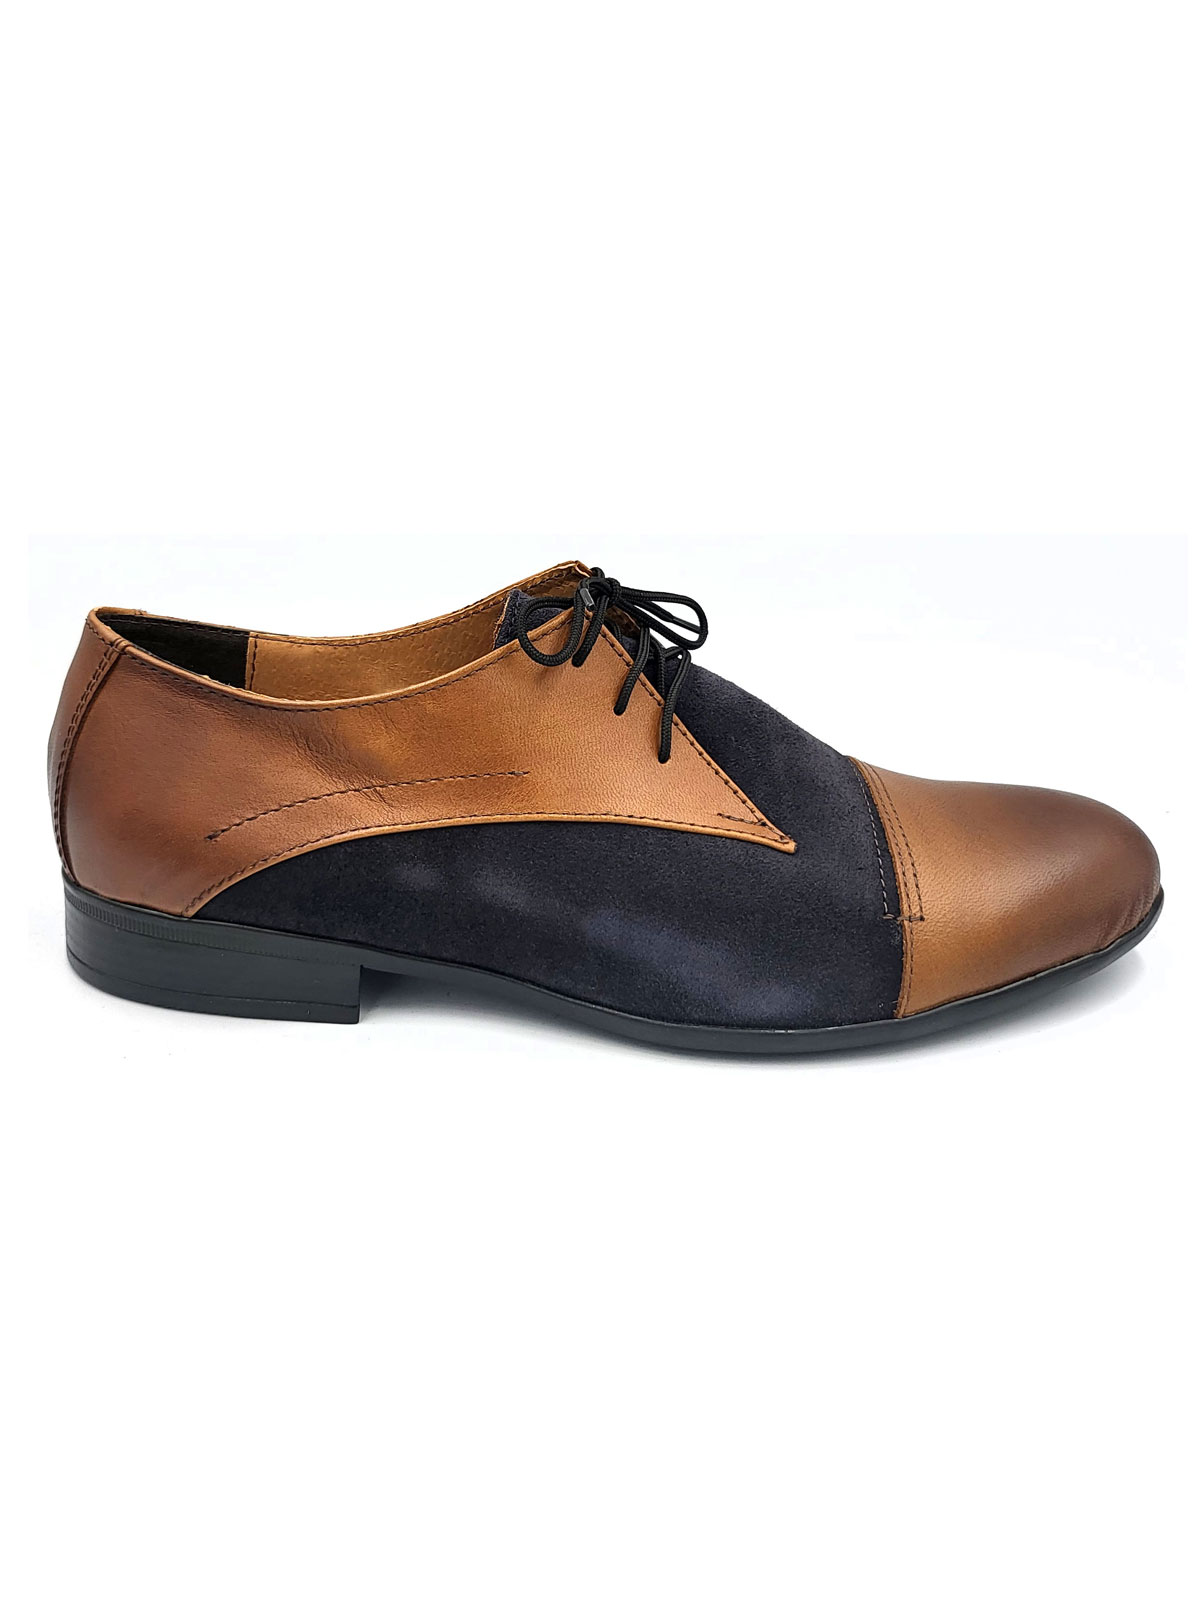 Mens shoes in camel and navy blue - 81092 - € 77.61 img2